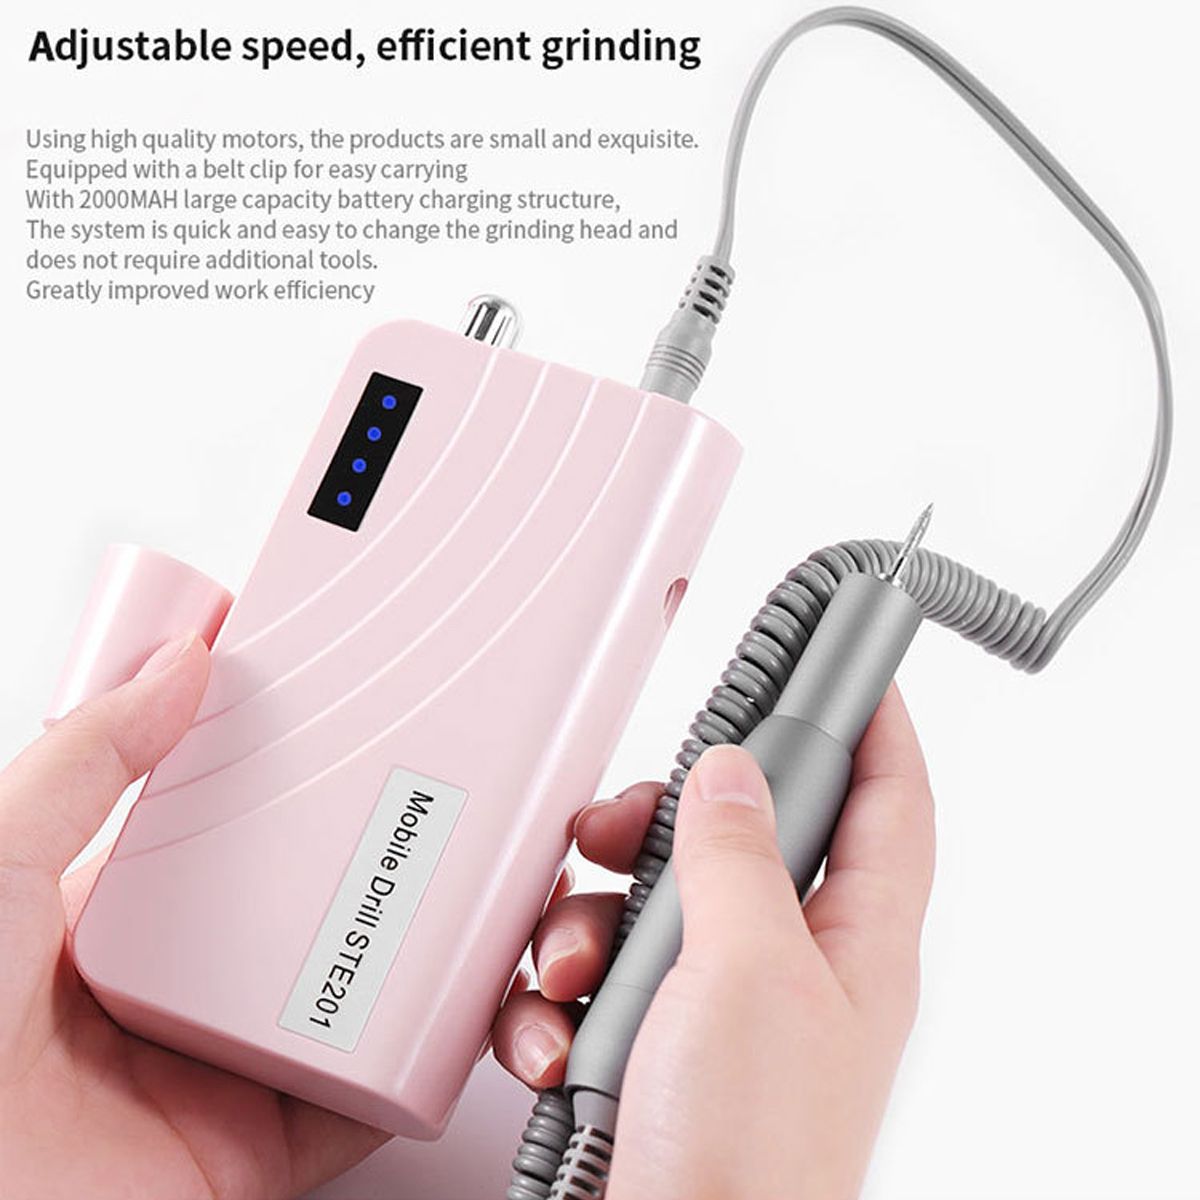 Portable-Rechargeable-Nail-Drill-Machine-24W-30000RPM-Electric-Nail-File-Nail-Art-Tools-Manicure-Set-1677045